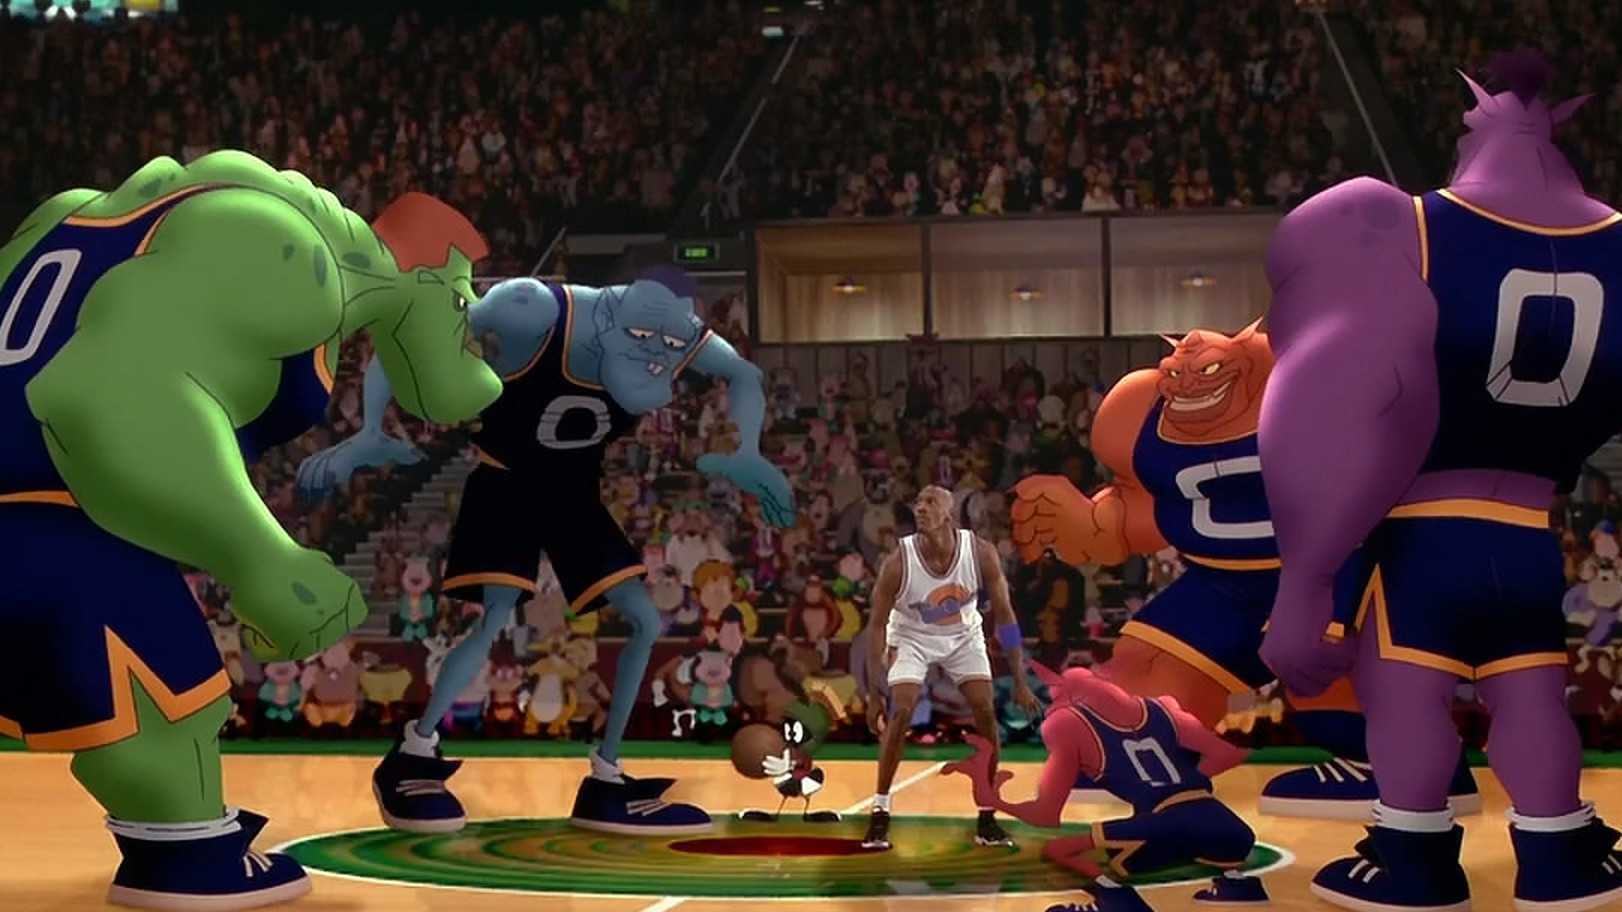  Hypothetical Space Jam 2 Casting